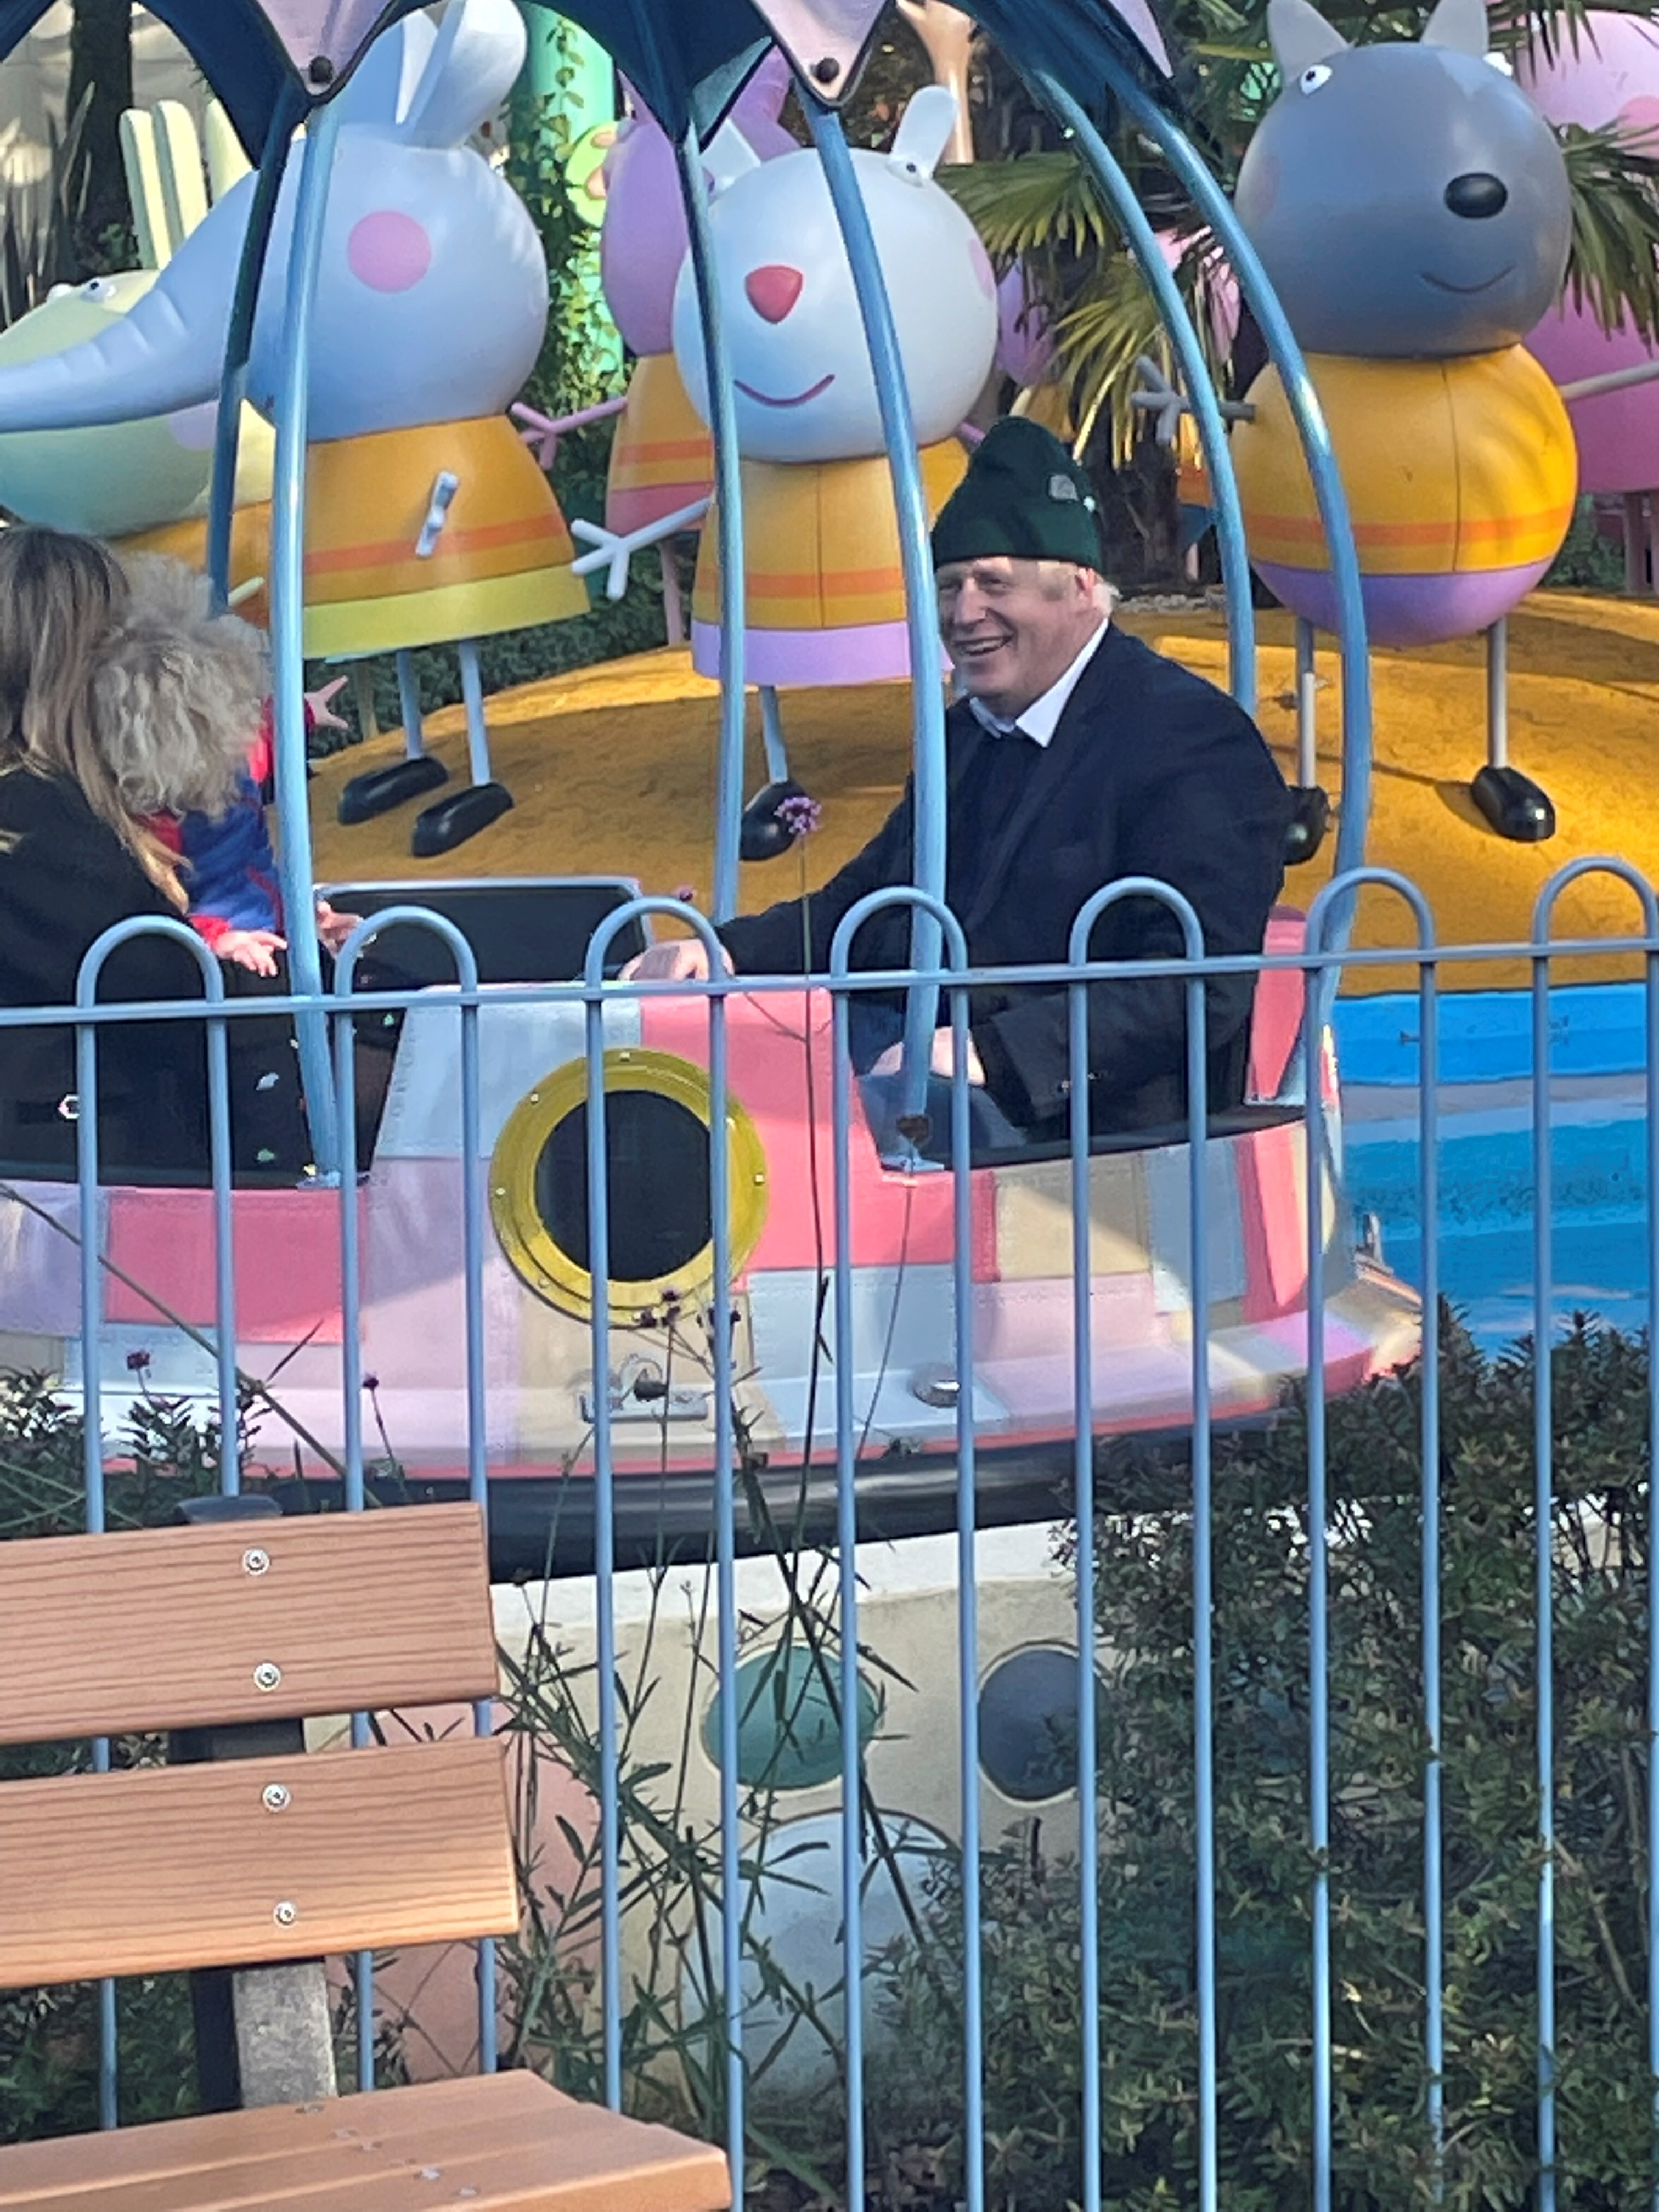 Britain's Prime Minister Boris Johnson enjoys a ride with his wife Carrie Johnson and son at Peppa Pig World near Ower